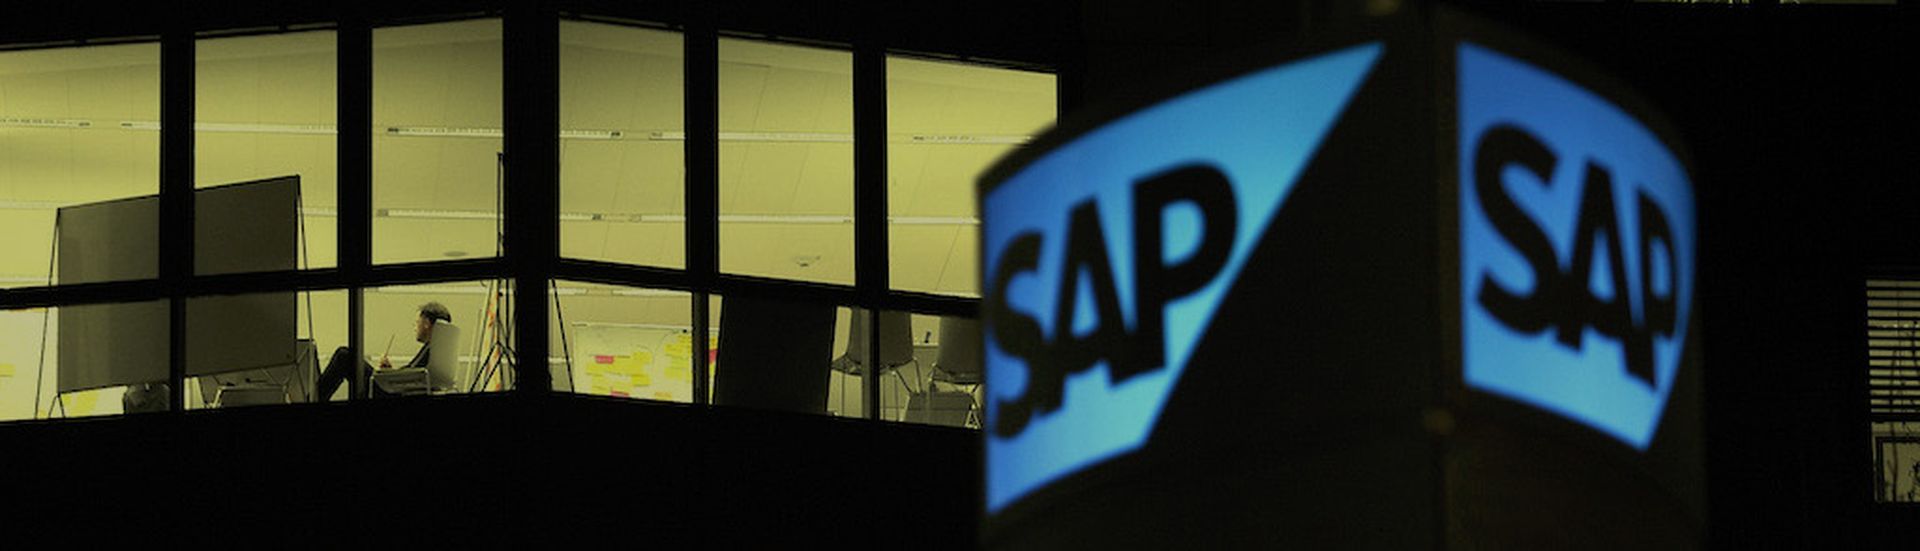 WALLDORF, GERMANY &#8211; JANUARY 08: A general view of the headquarters of SAP AG, Germany&#8217;s largest software company on January 8, 2013 in Walldorf, Germany.  The software giant plans to continue to expand its research and development centres throughout Asia. (Photo by Thomas Lohnes/Getty Images)